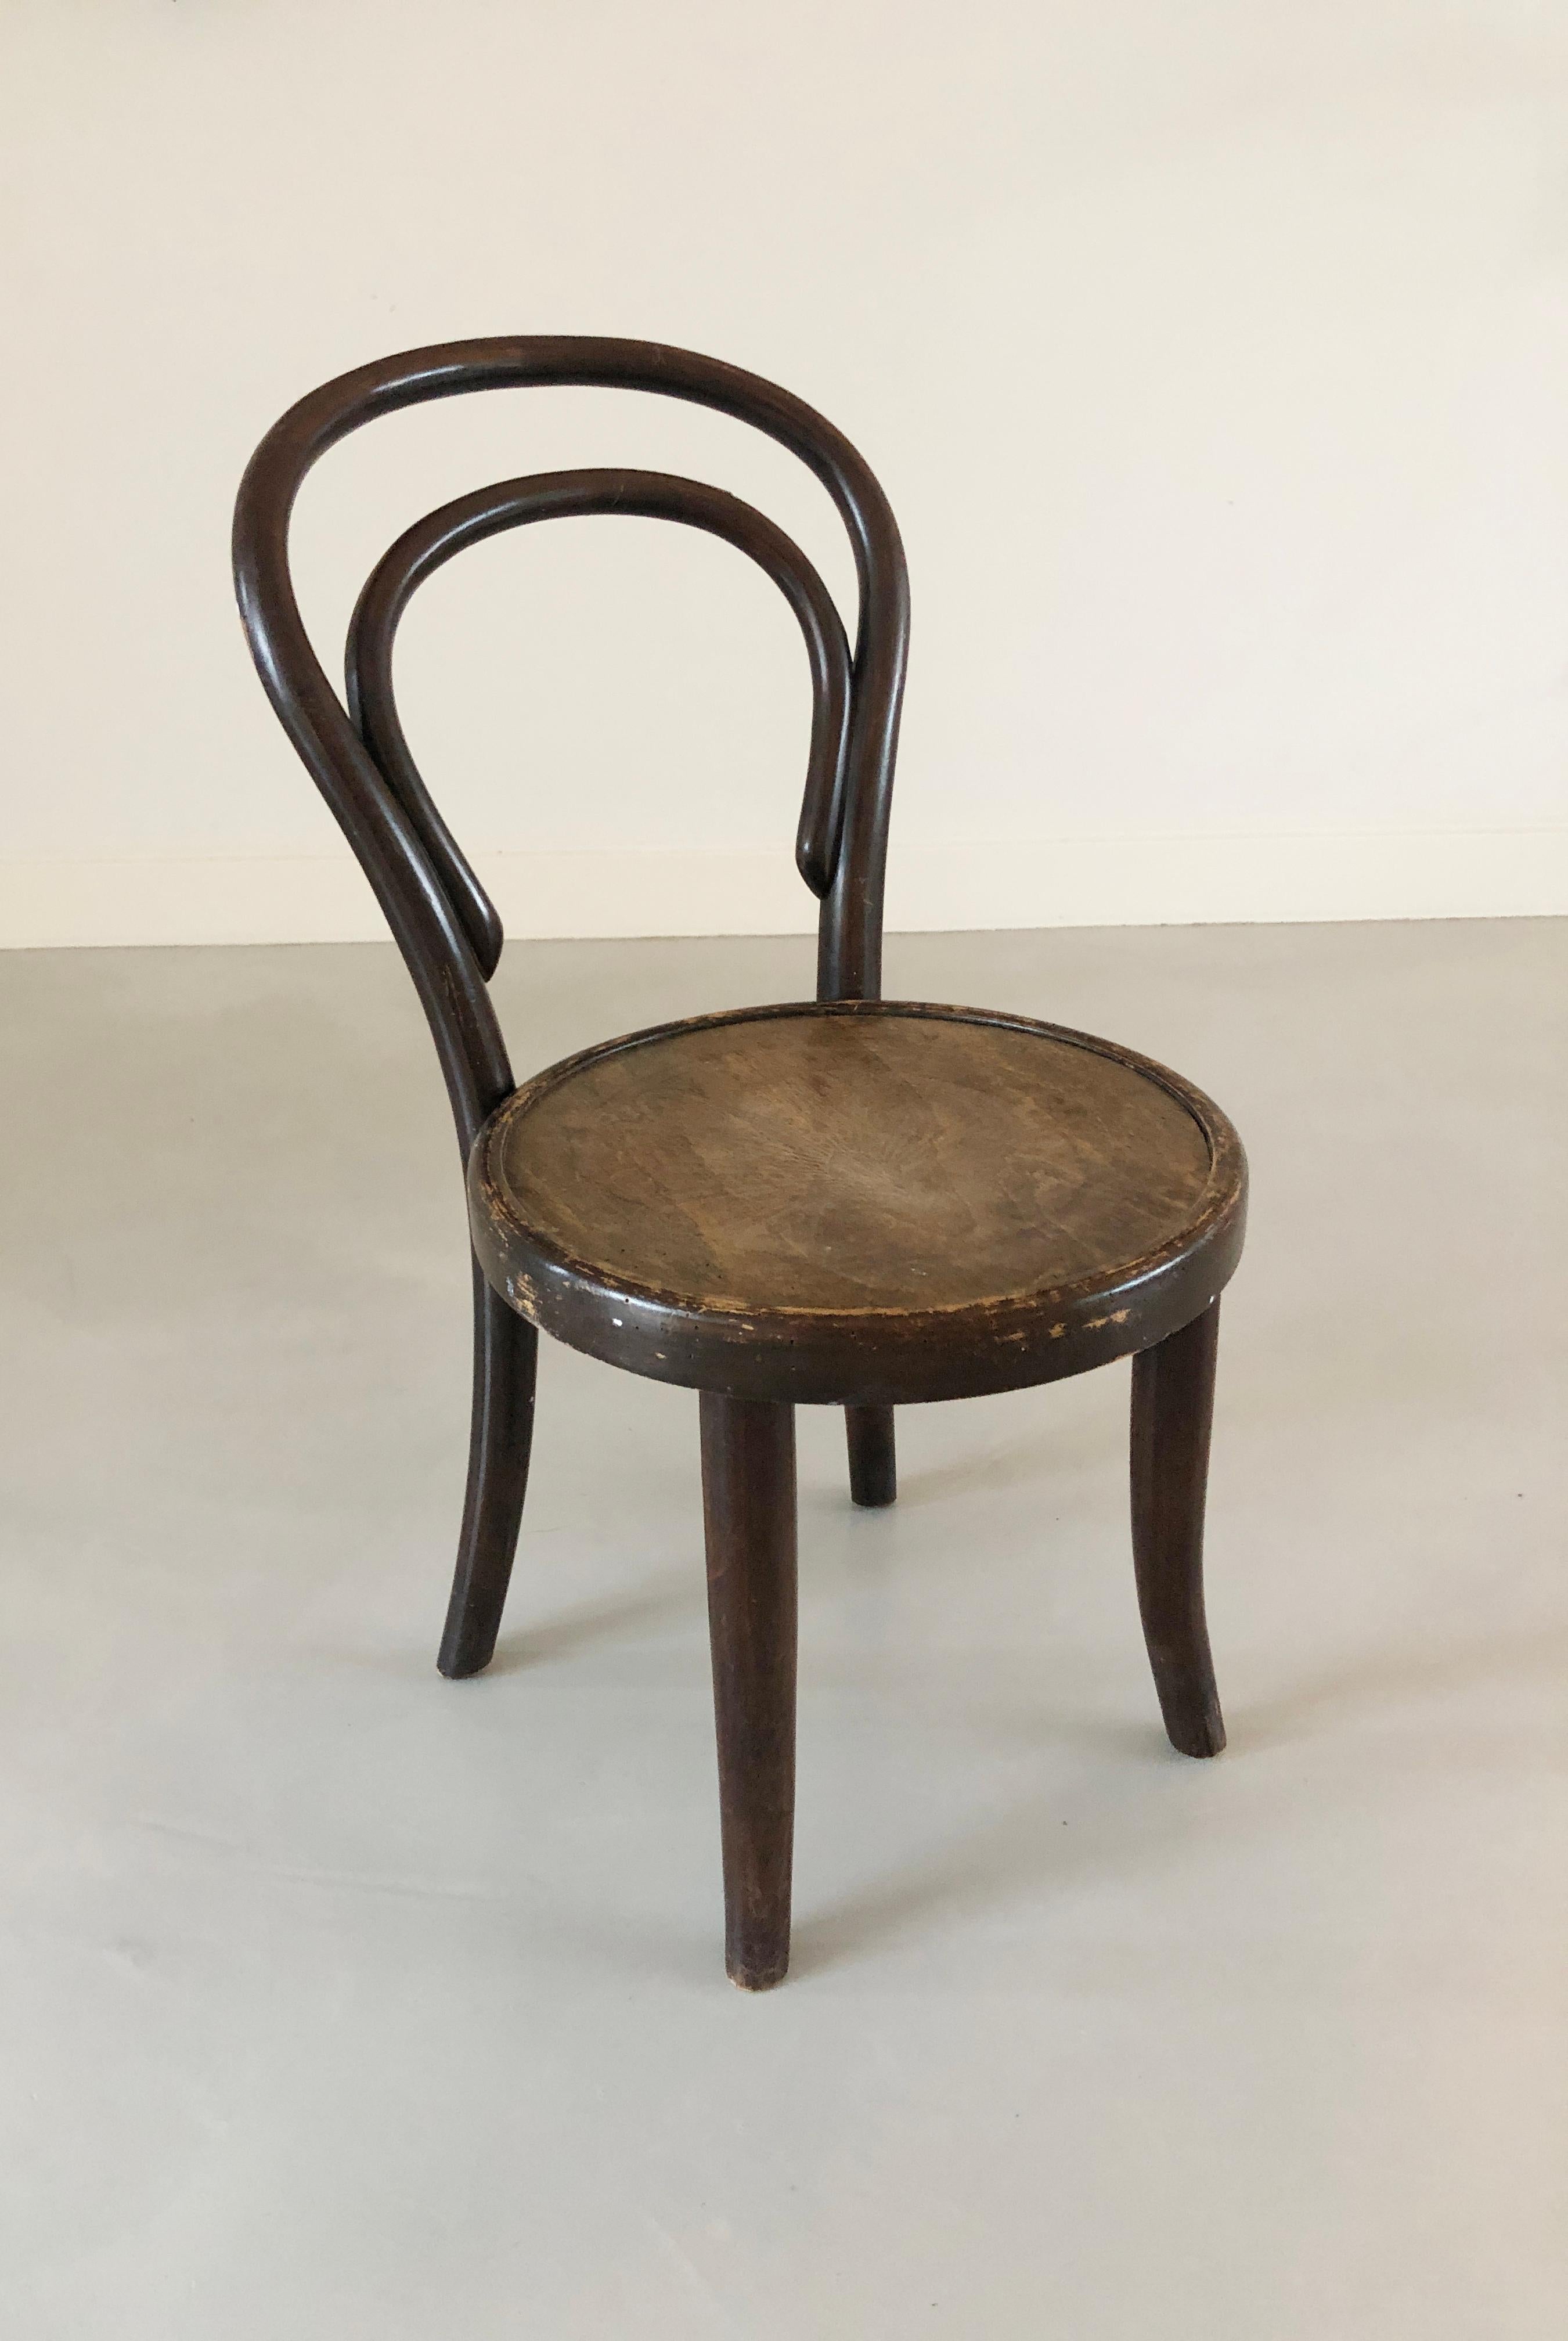 Thonet Child Chair No14 / designed 1859 Vienna / Stamped and labeled / Bentwood 8